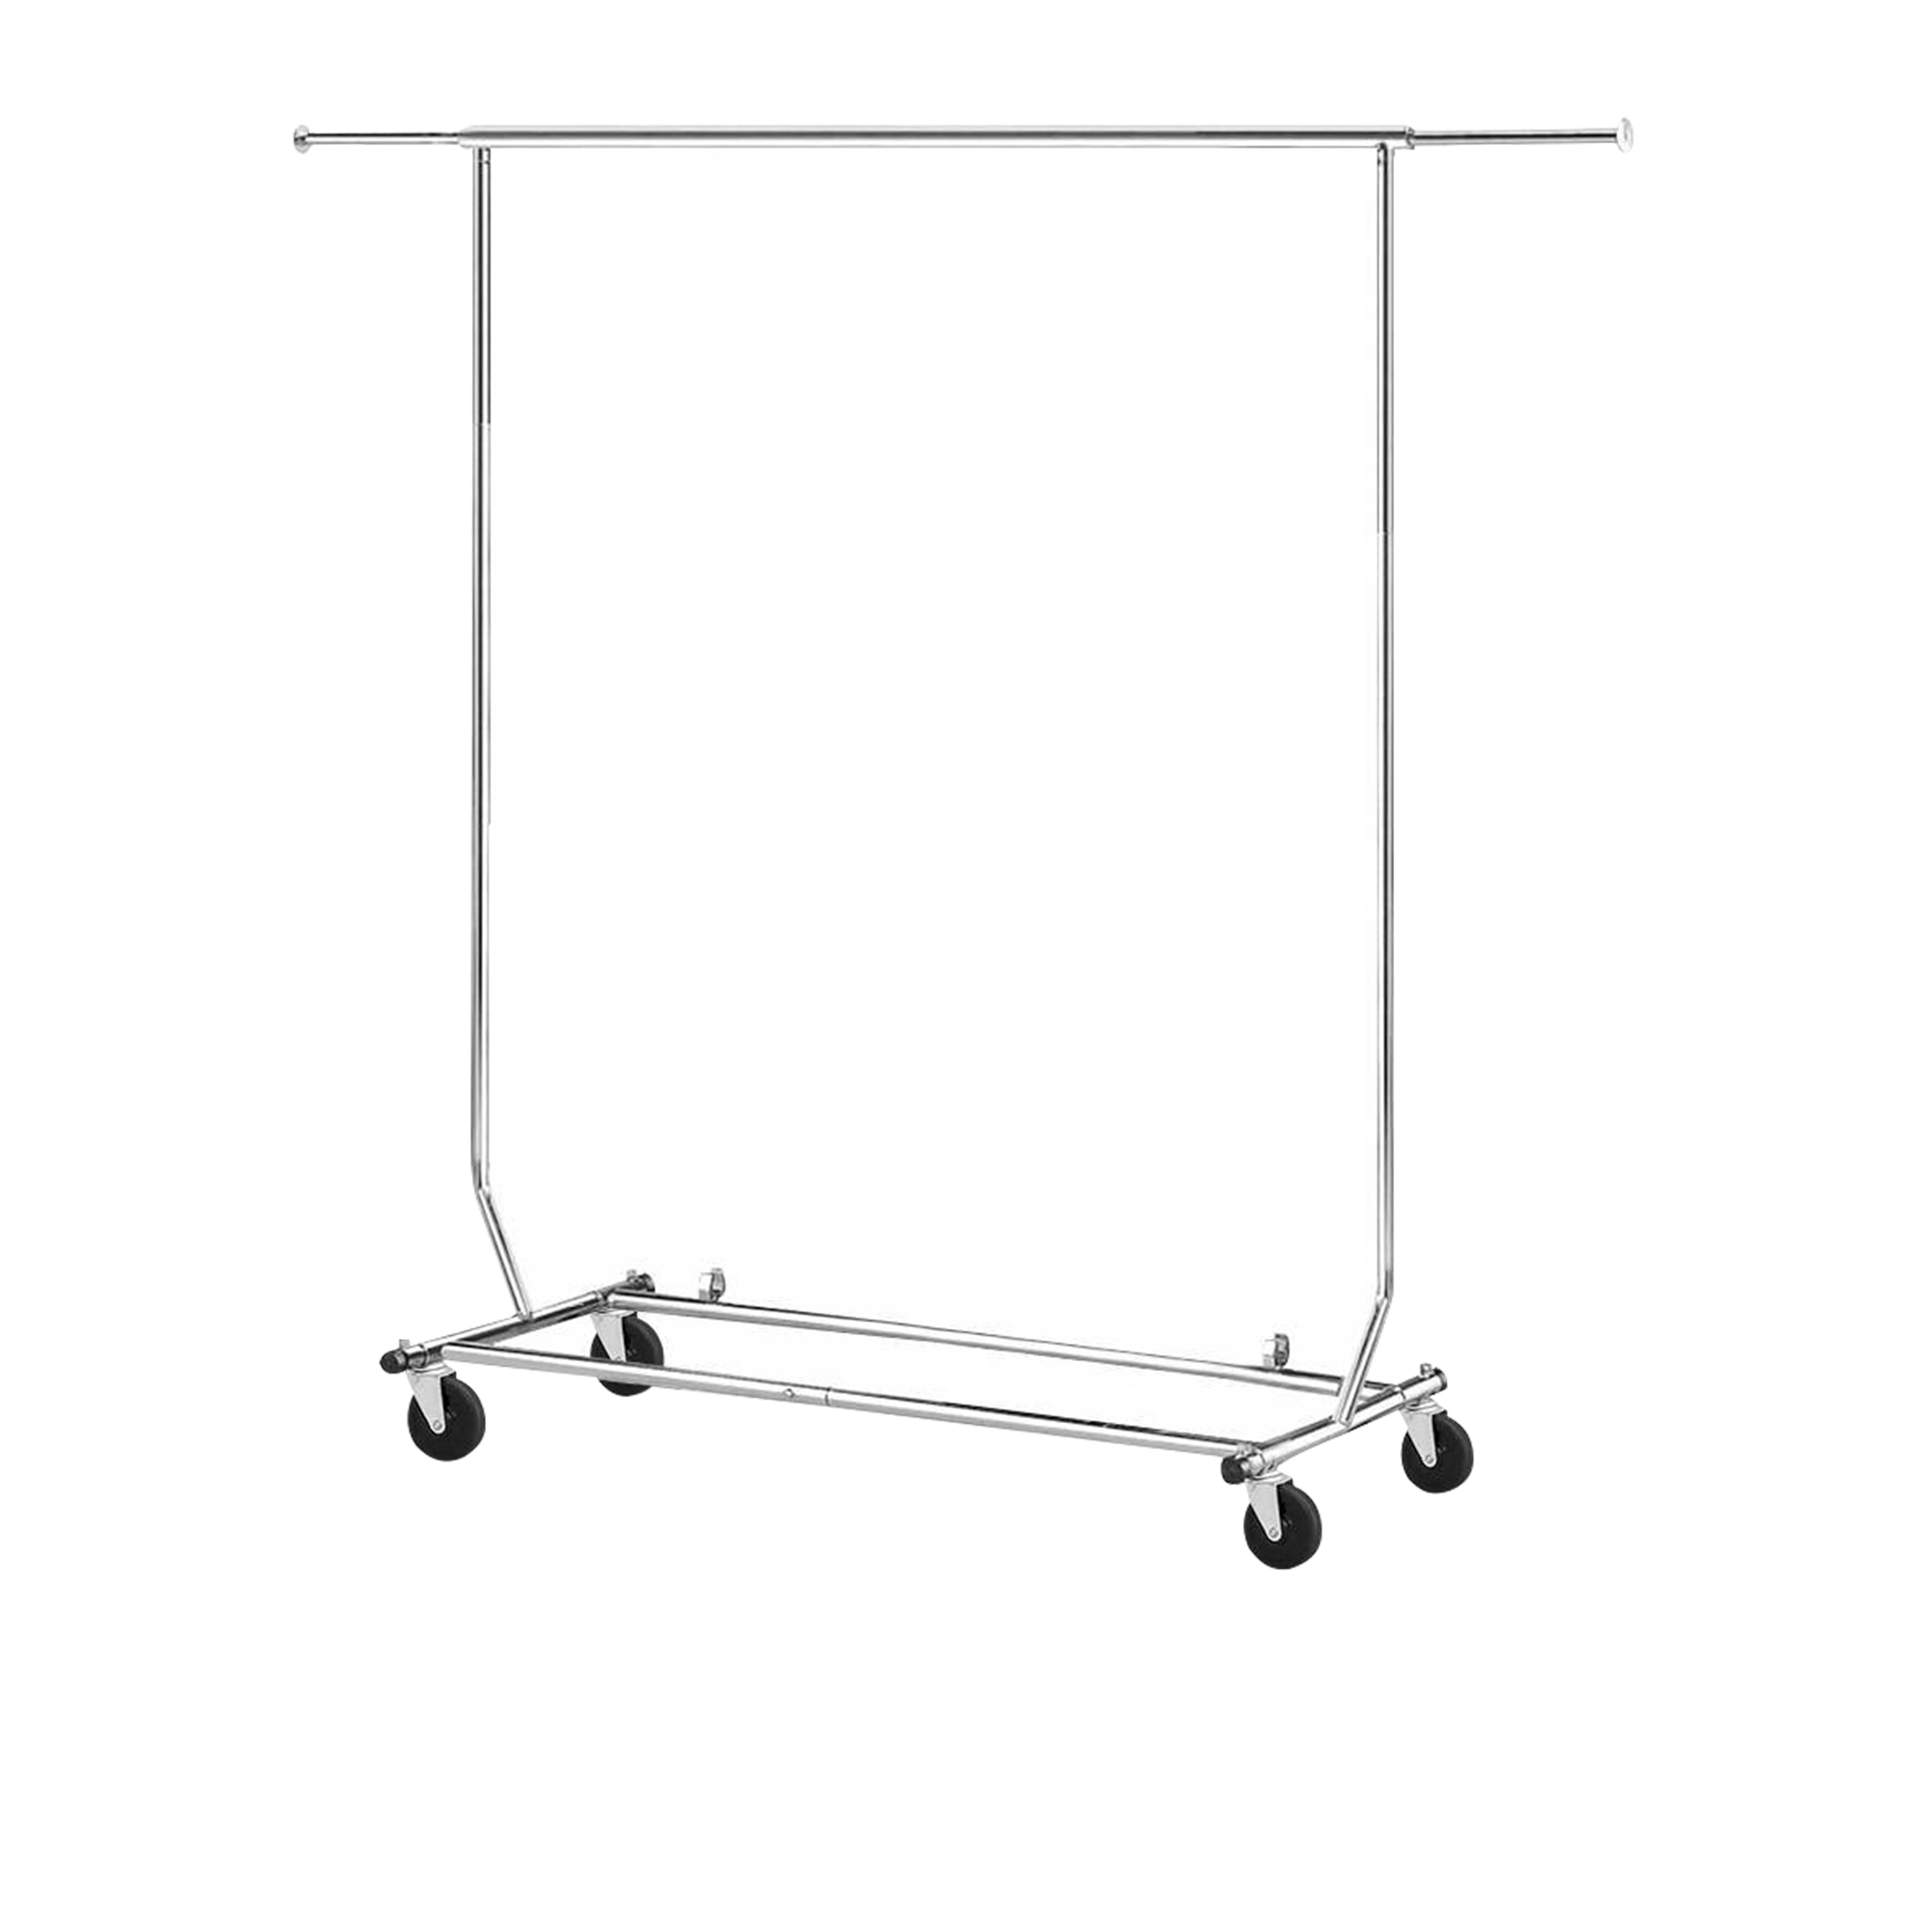 Artiss Portable Clothes Drying Rack Silver Image 1